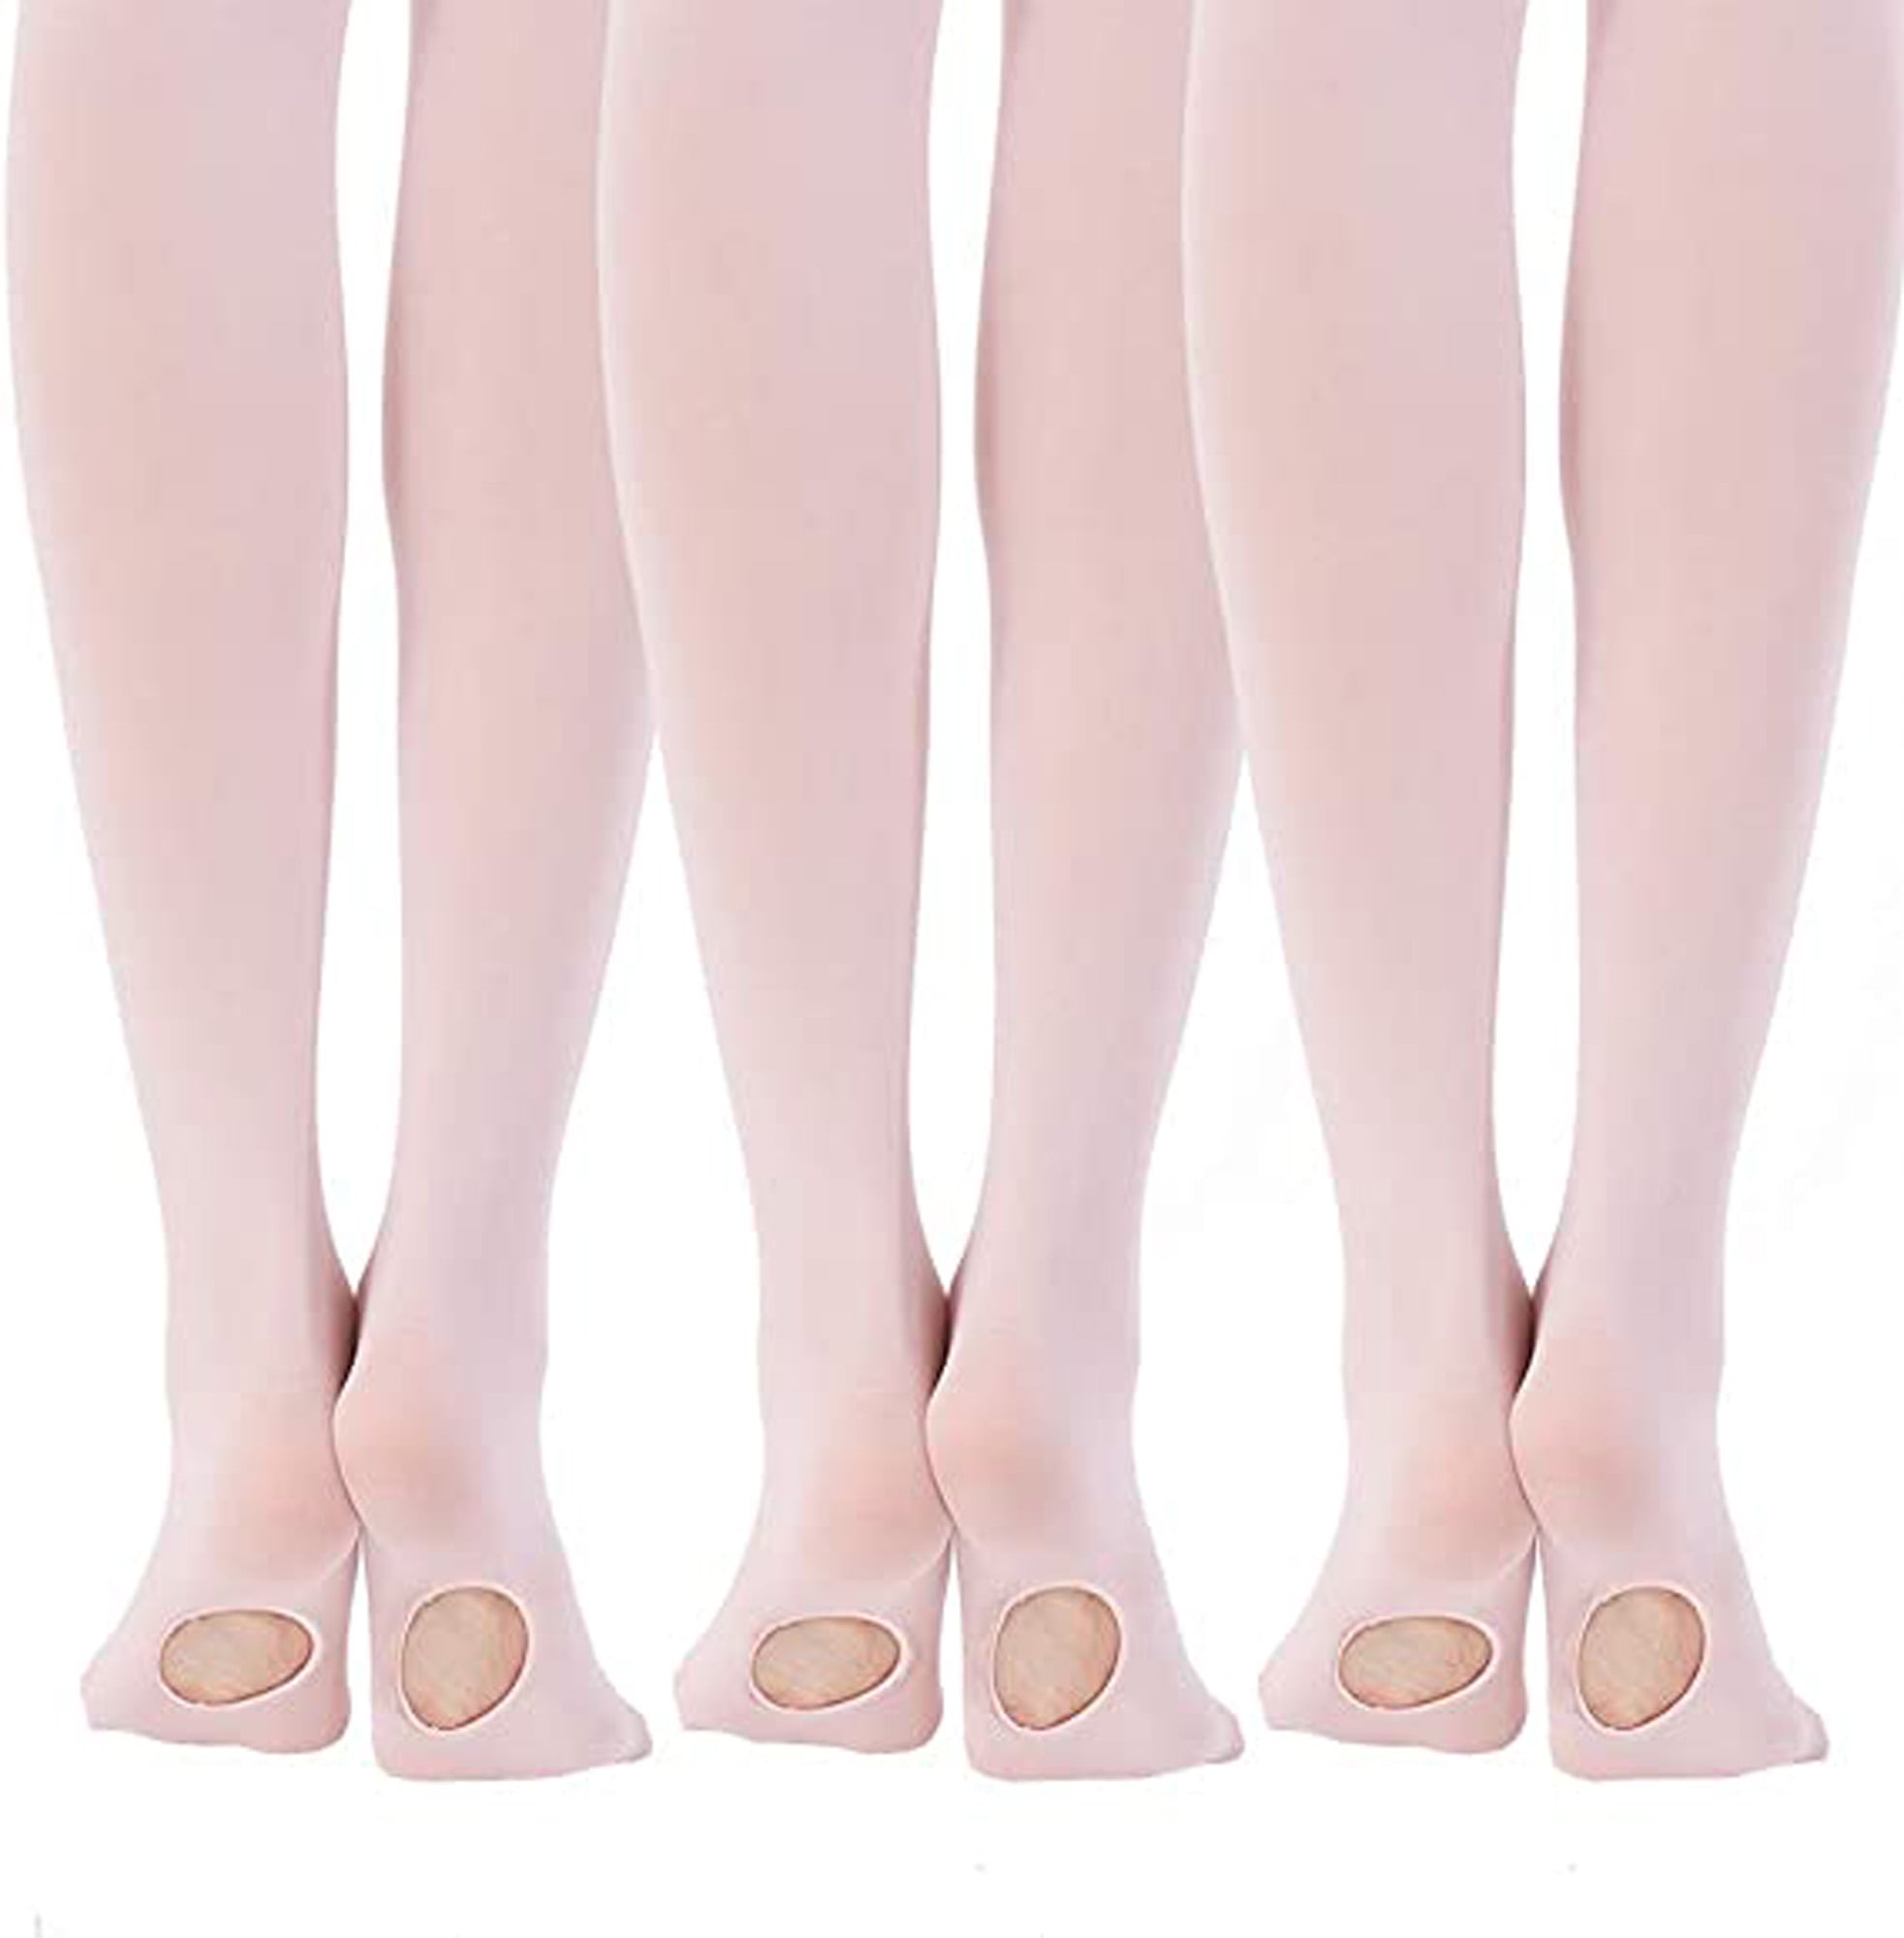  WalBryka High Elastic Ballet Dance Tights for Women Girls  Convertible Transition Ultra Soft Panty hose(4pair ballet pink,X-Smell) :  Clothing, Shoes & Jewelry